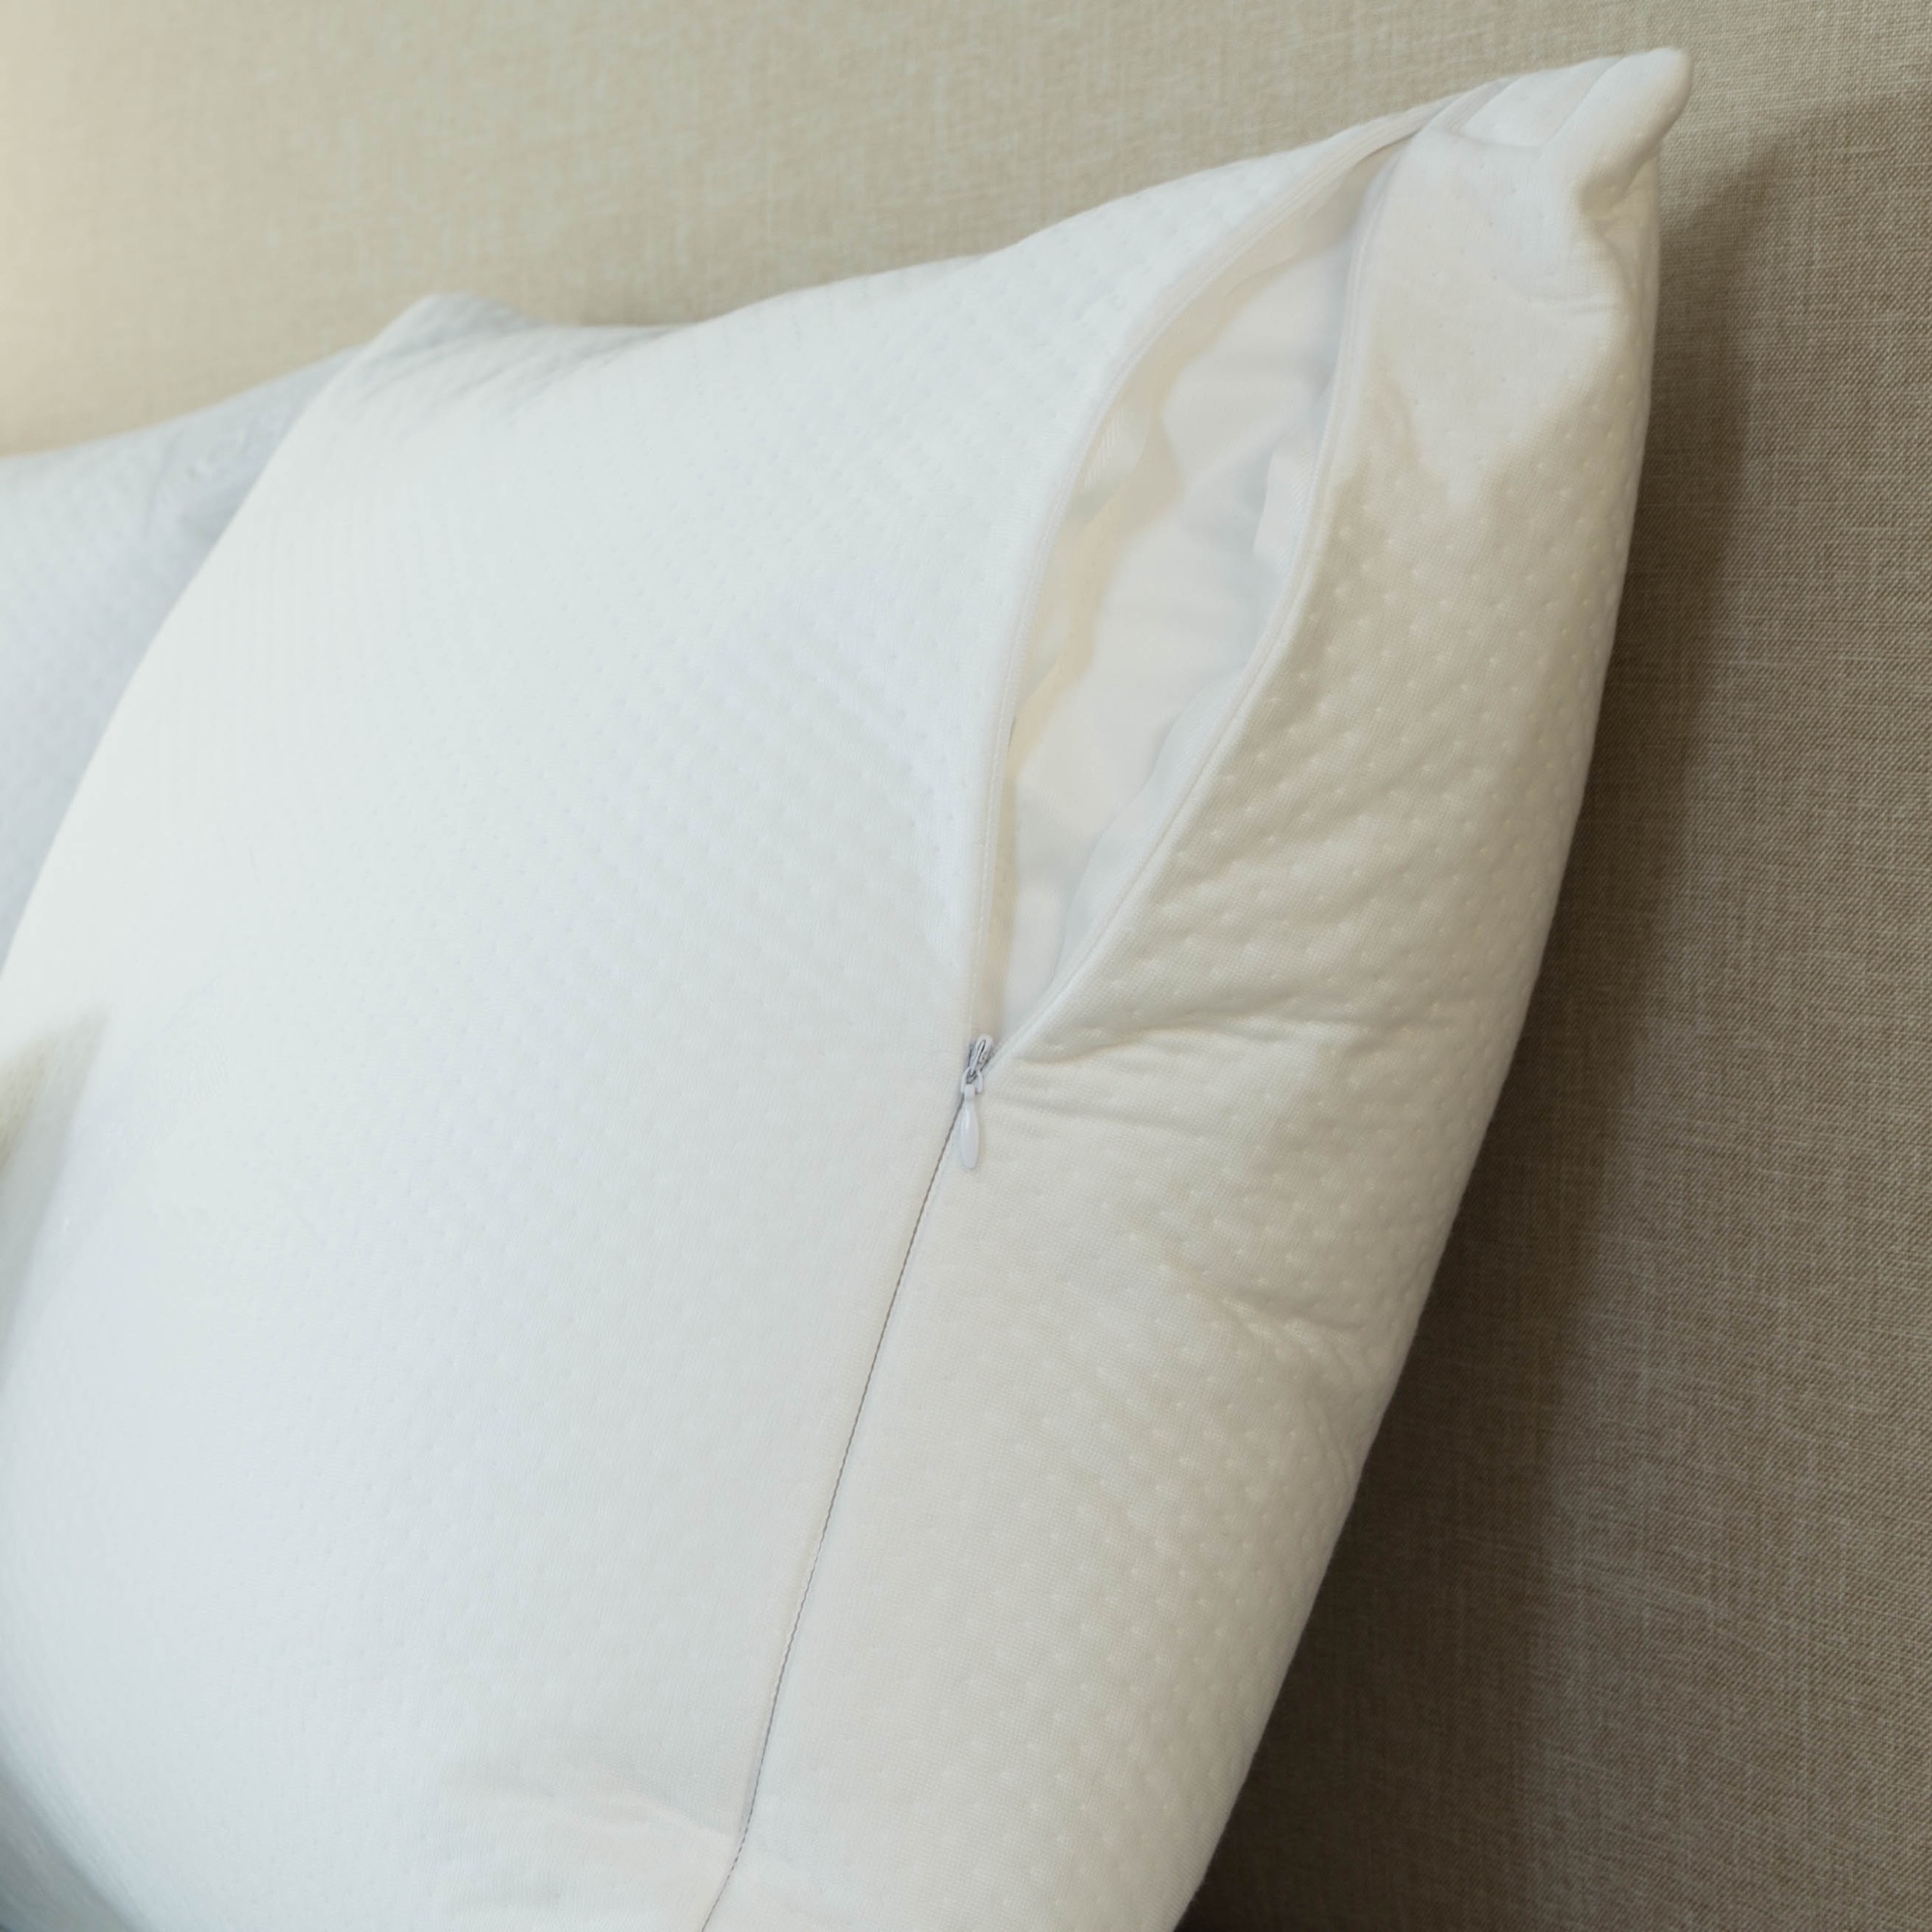 Protect-A-Bed Signature Series Pillow Protector